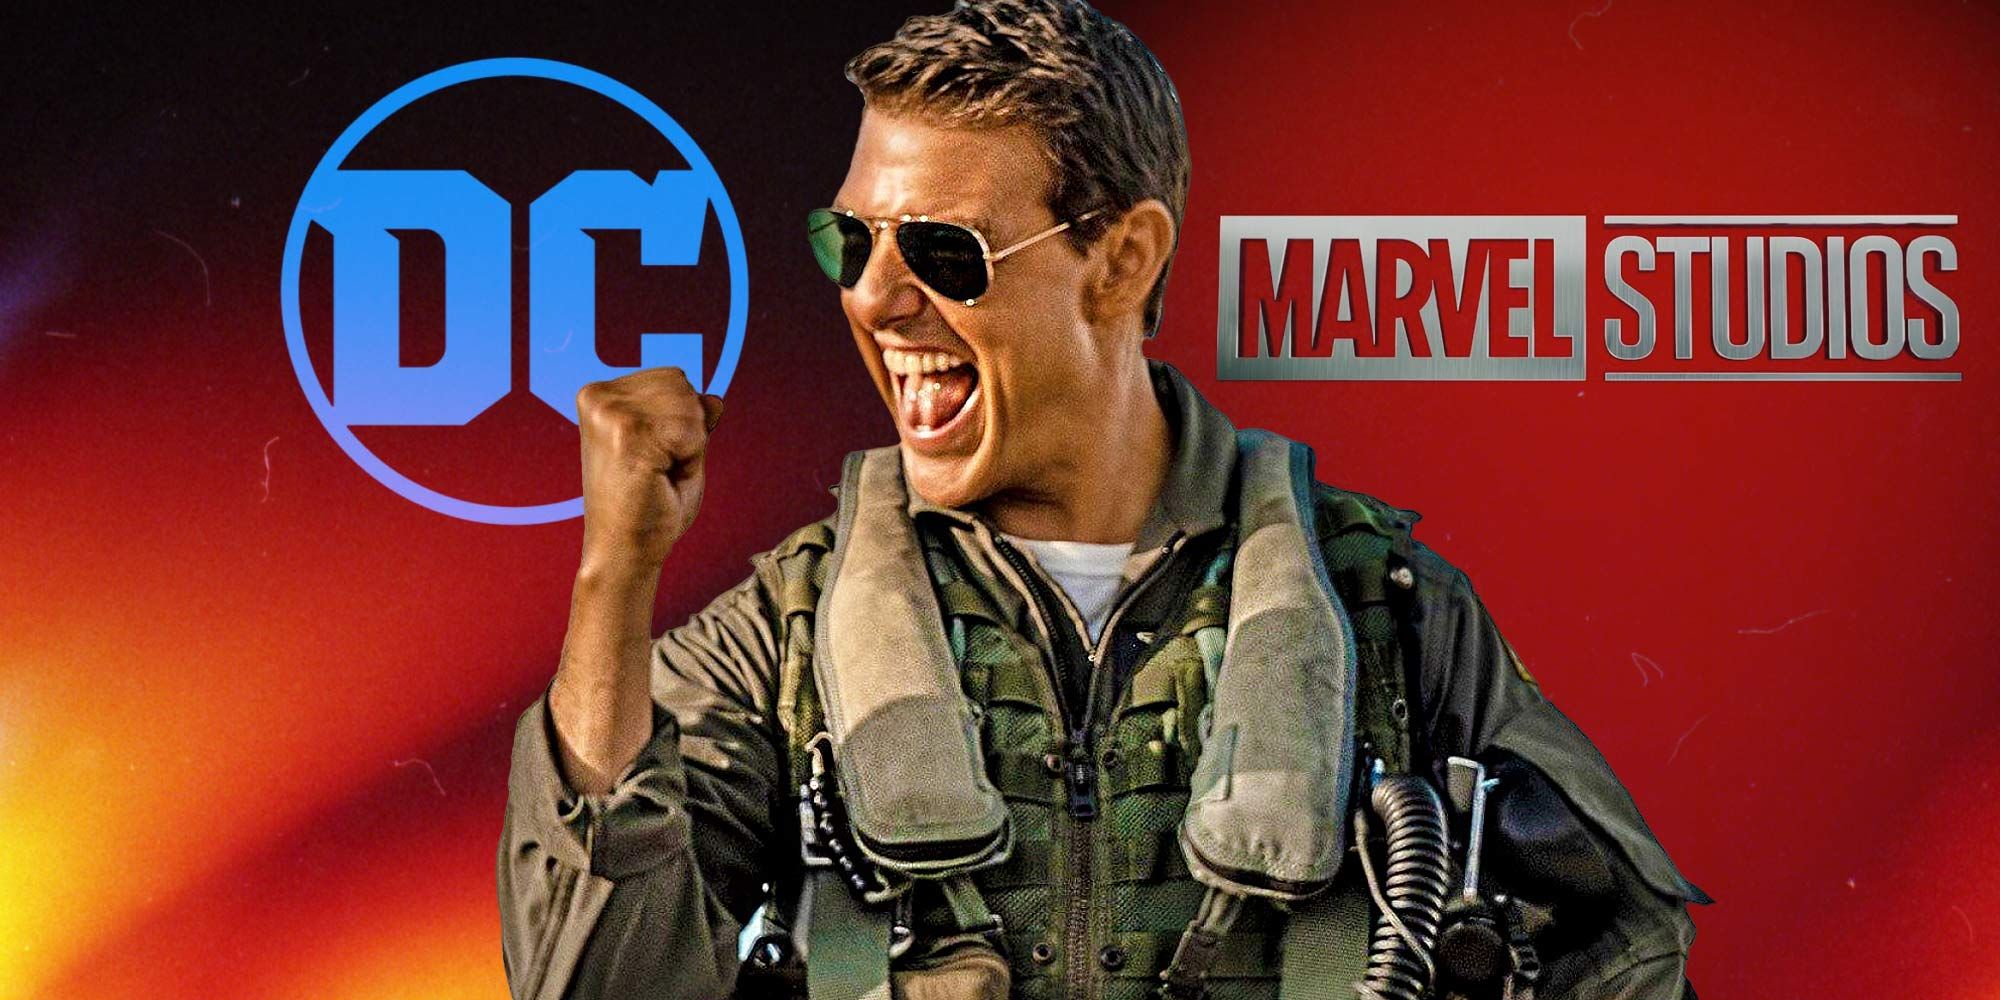 Tom Cruise in Top Gun Maverick next to the DC and Marvel logos